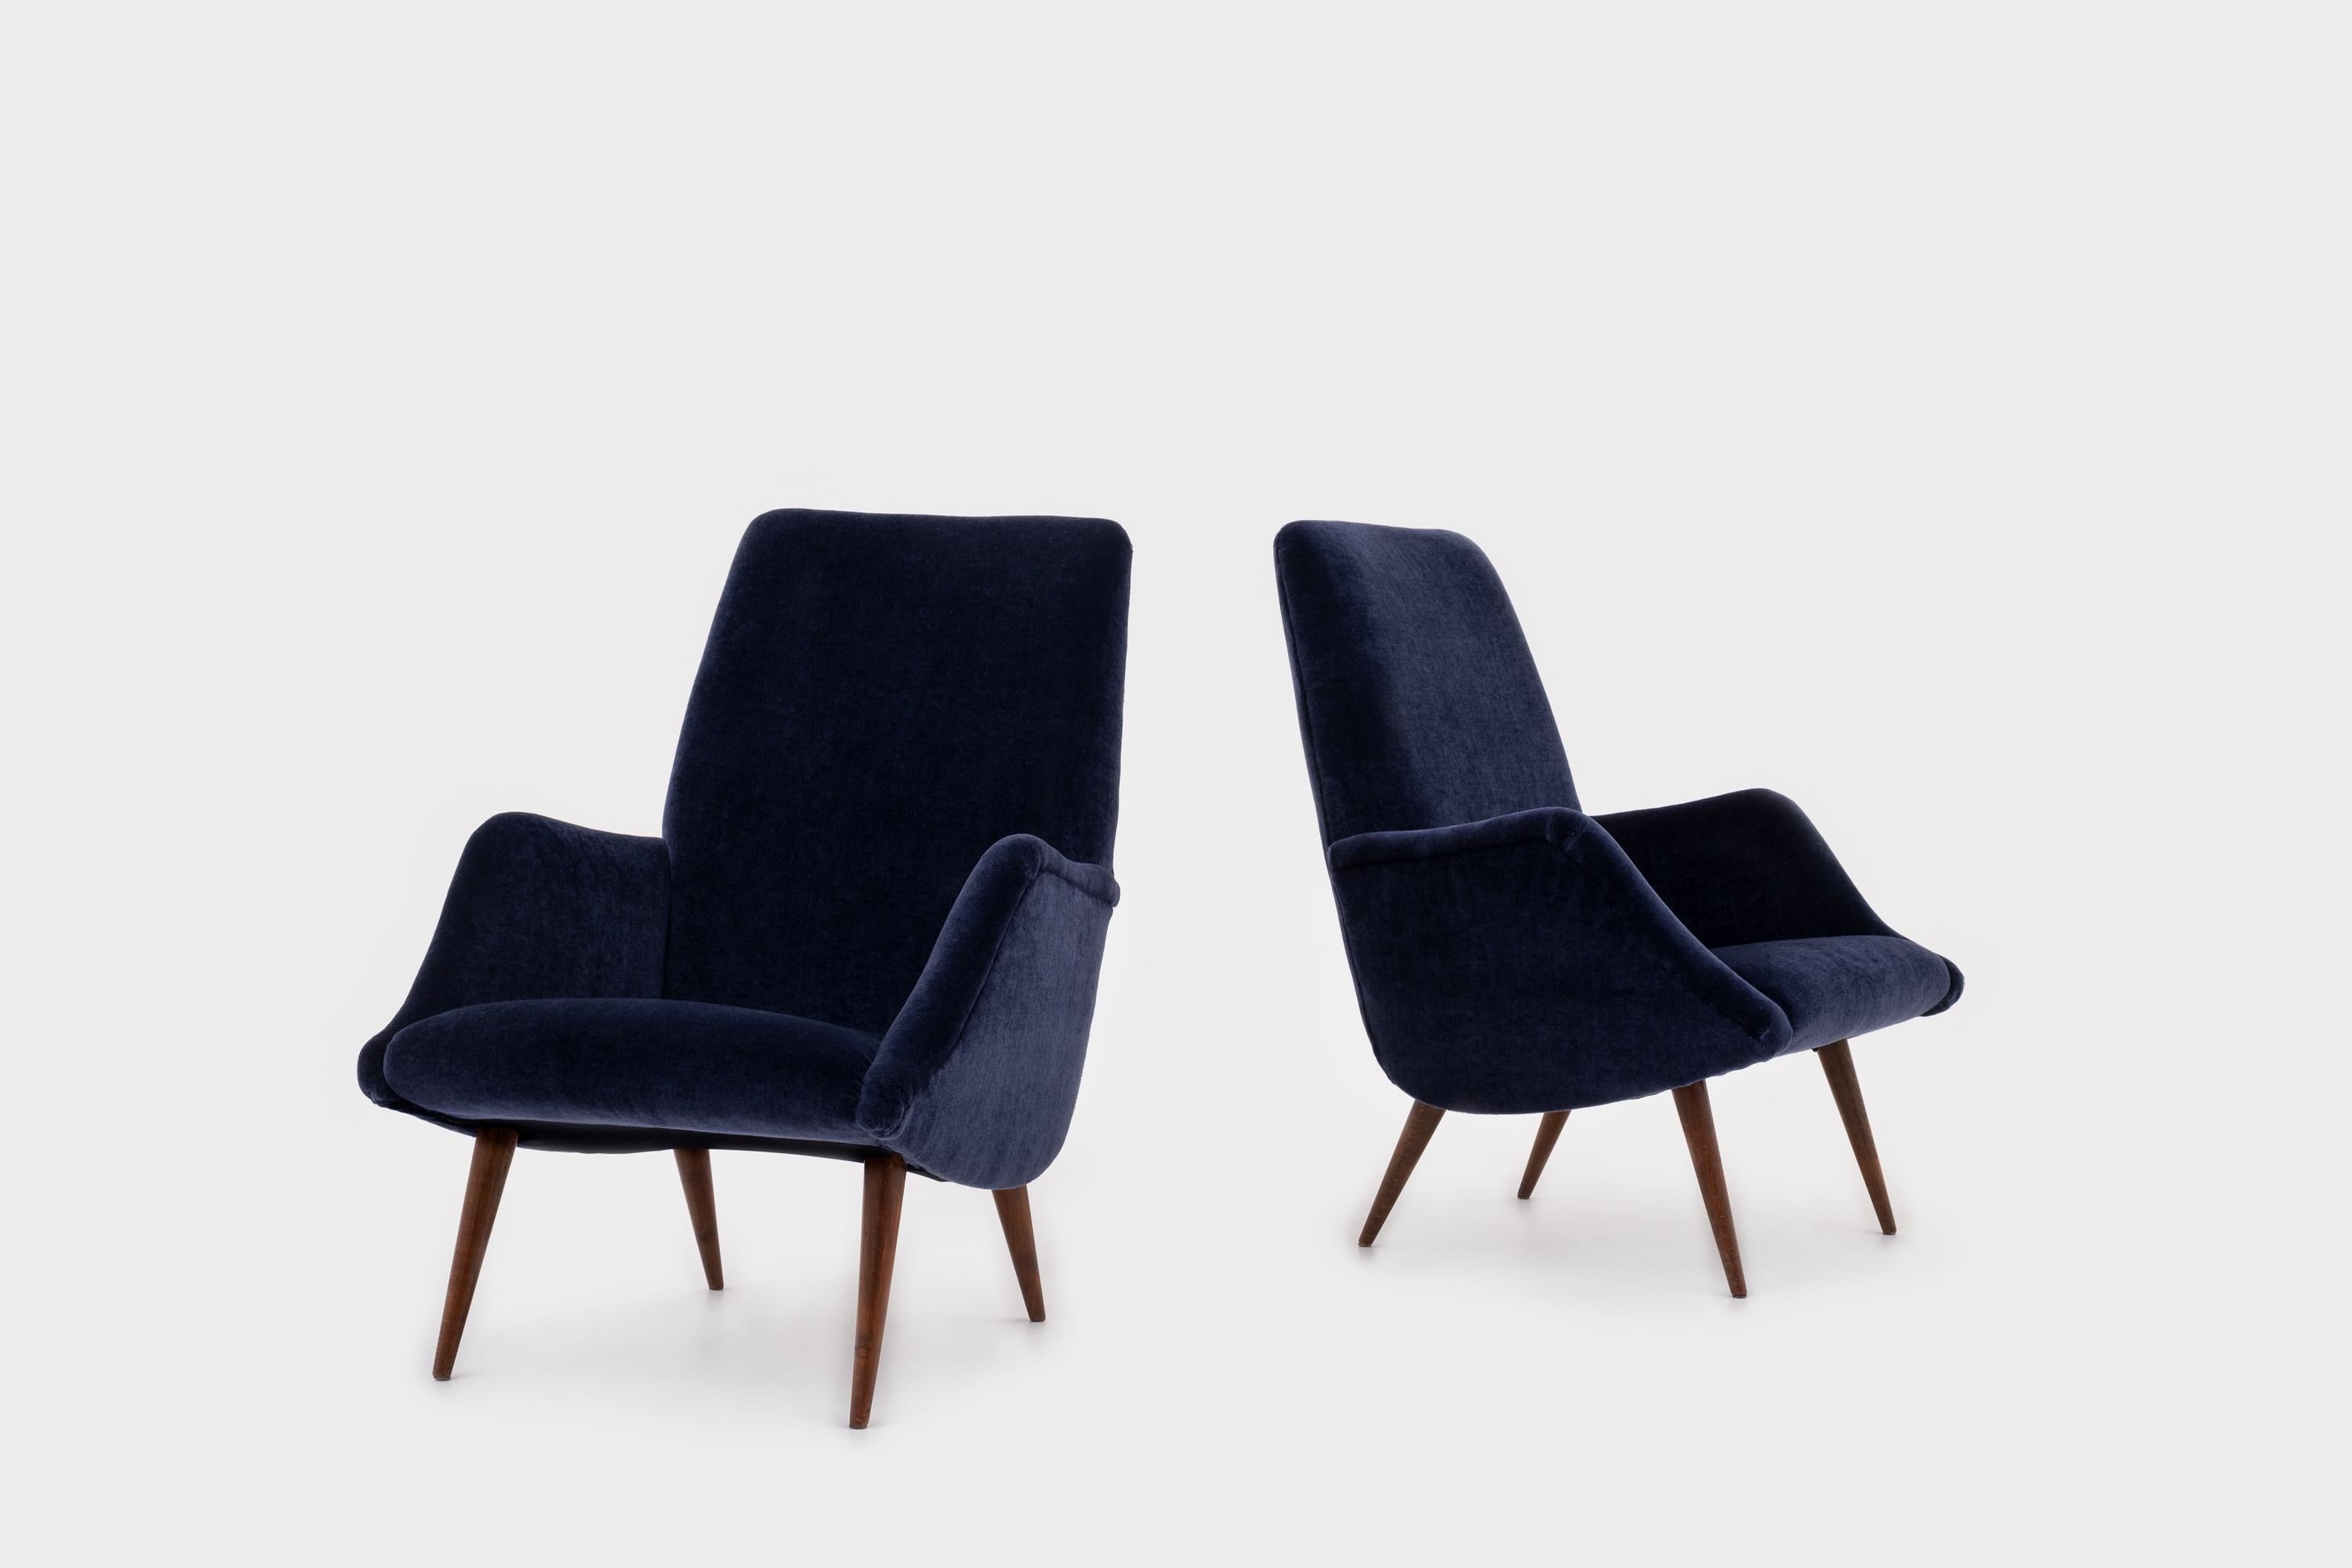 Beautiful pair of ‘806’ armchairs by Carlo de Carli for Cassina, Italy, 1955. Elegant curved shape with nice distinctive sharp tapered Italian walnut wooden legs. The chairs are fully reconditioned and are upholstered in a high quality night blue